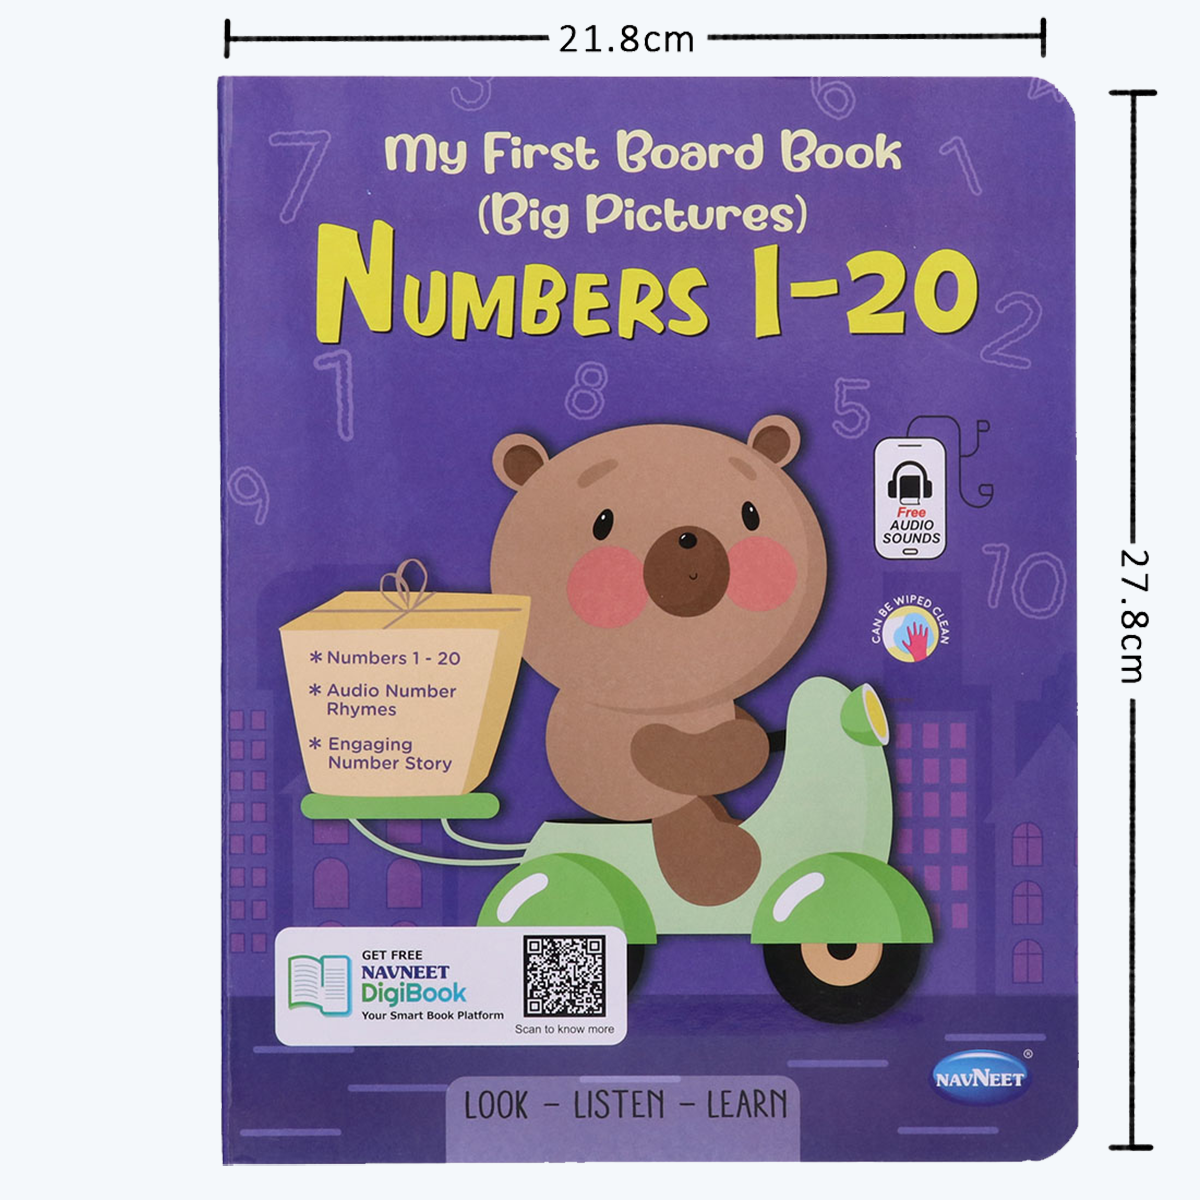 Navneet My First Board Book (Single Picture) Numbers 1 to 20- Bestselling Picture board books for Babies & Toddlers: Large Picture Board Book with Audio Number Sounds and Counting Songs